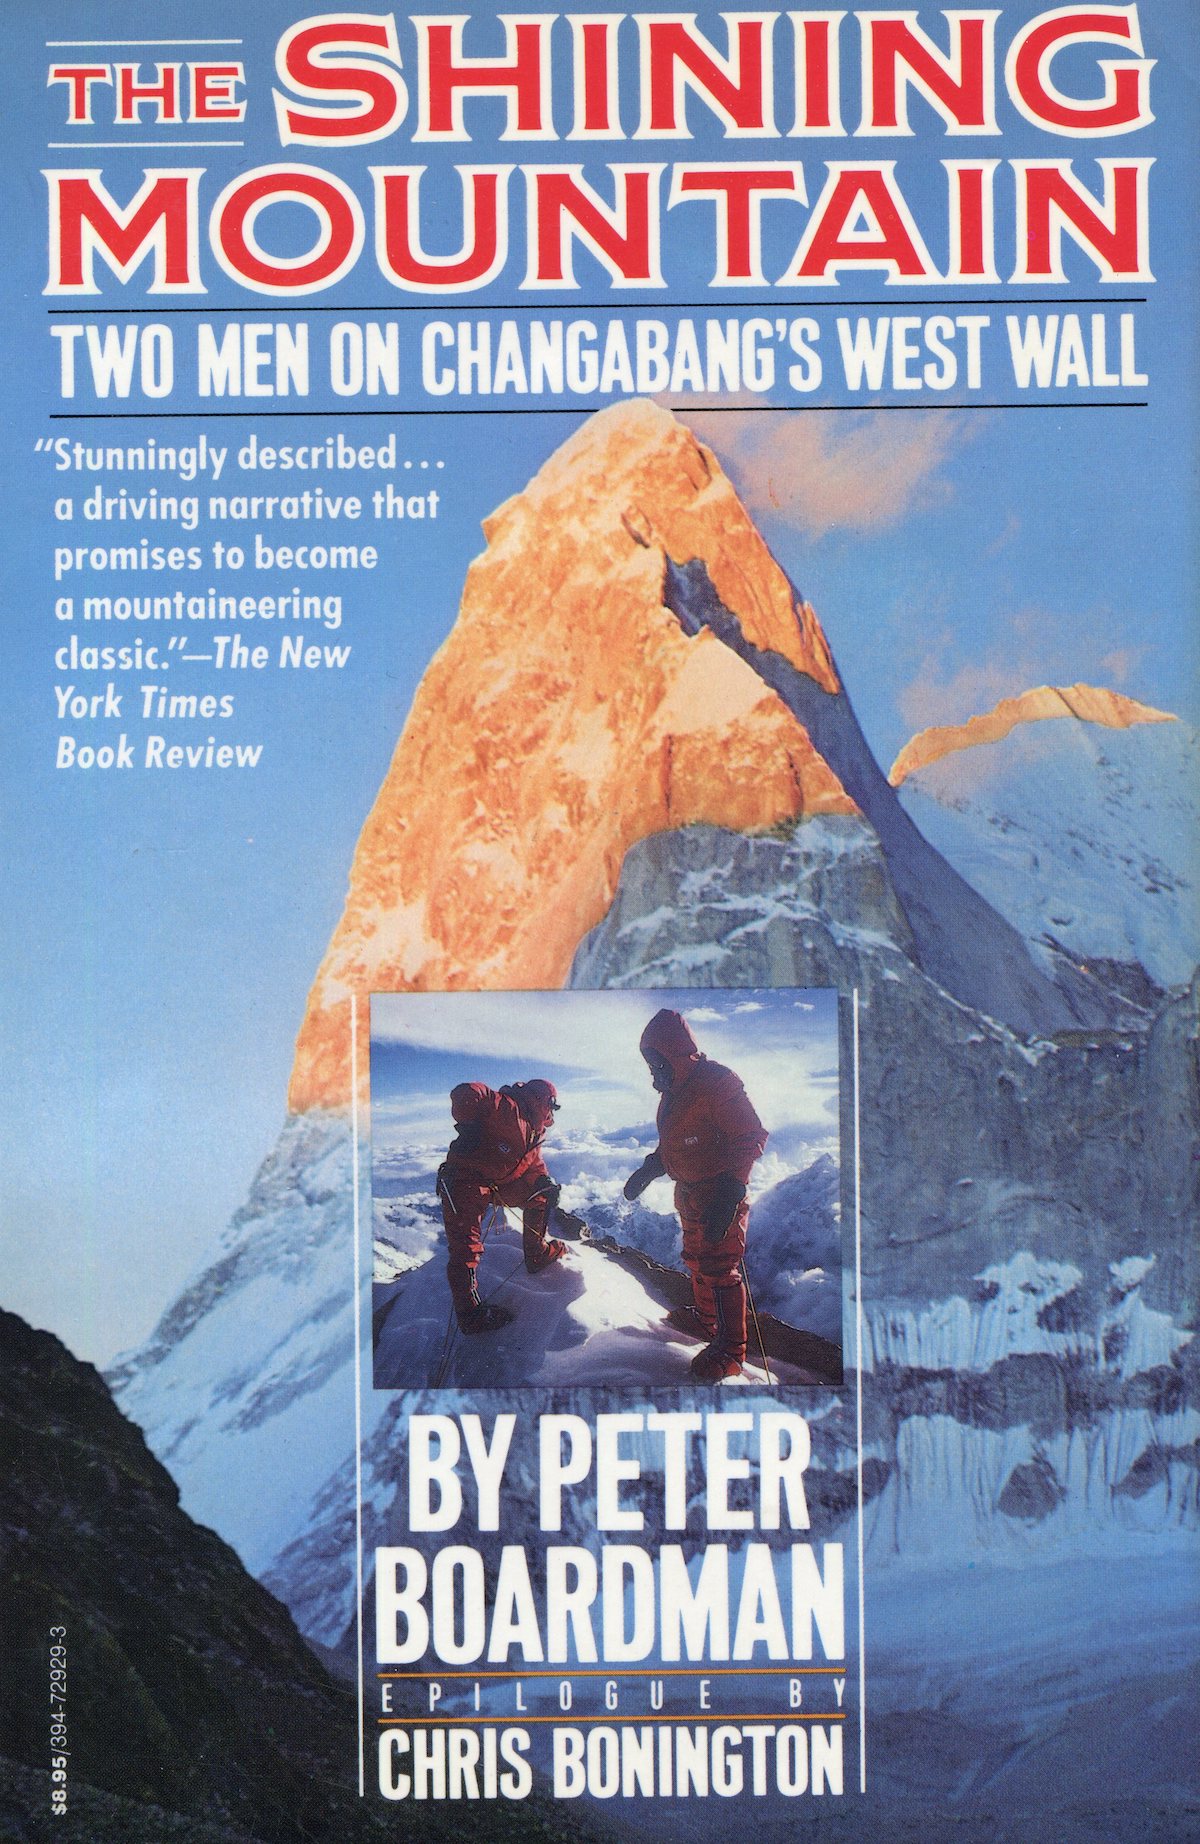 Cover image for an edition of The Shining Mountain [Photo] Provided by Stephen Slemon